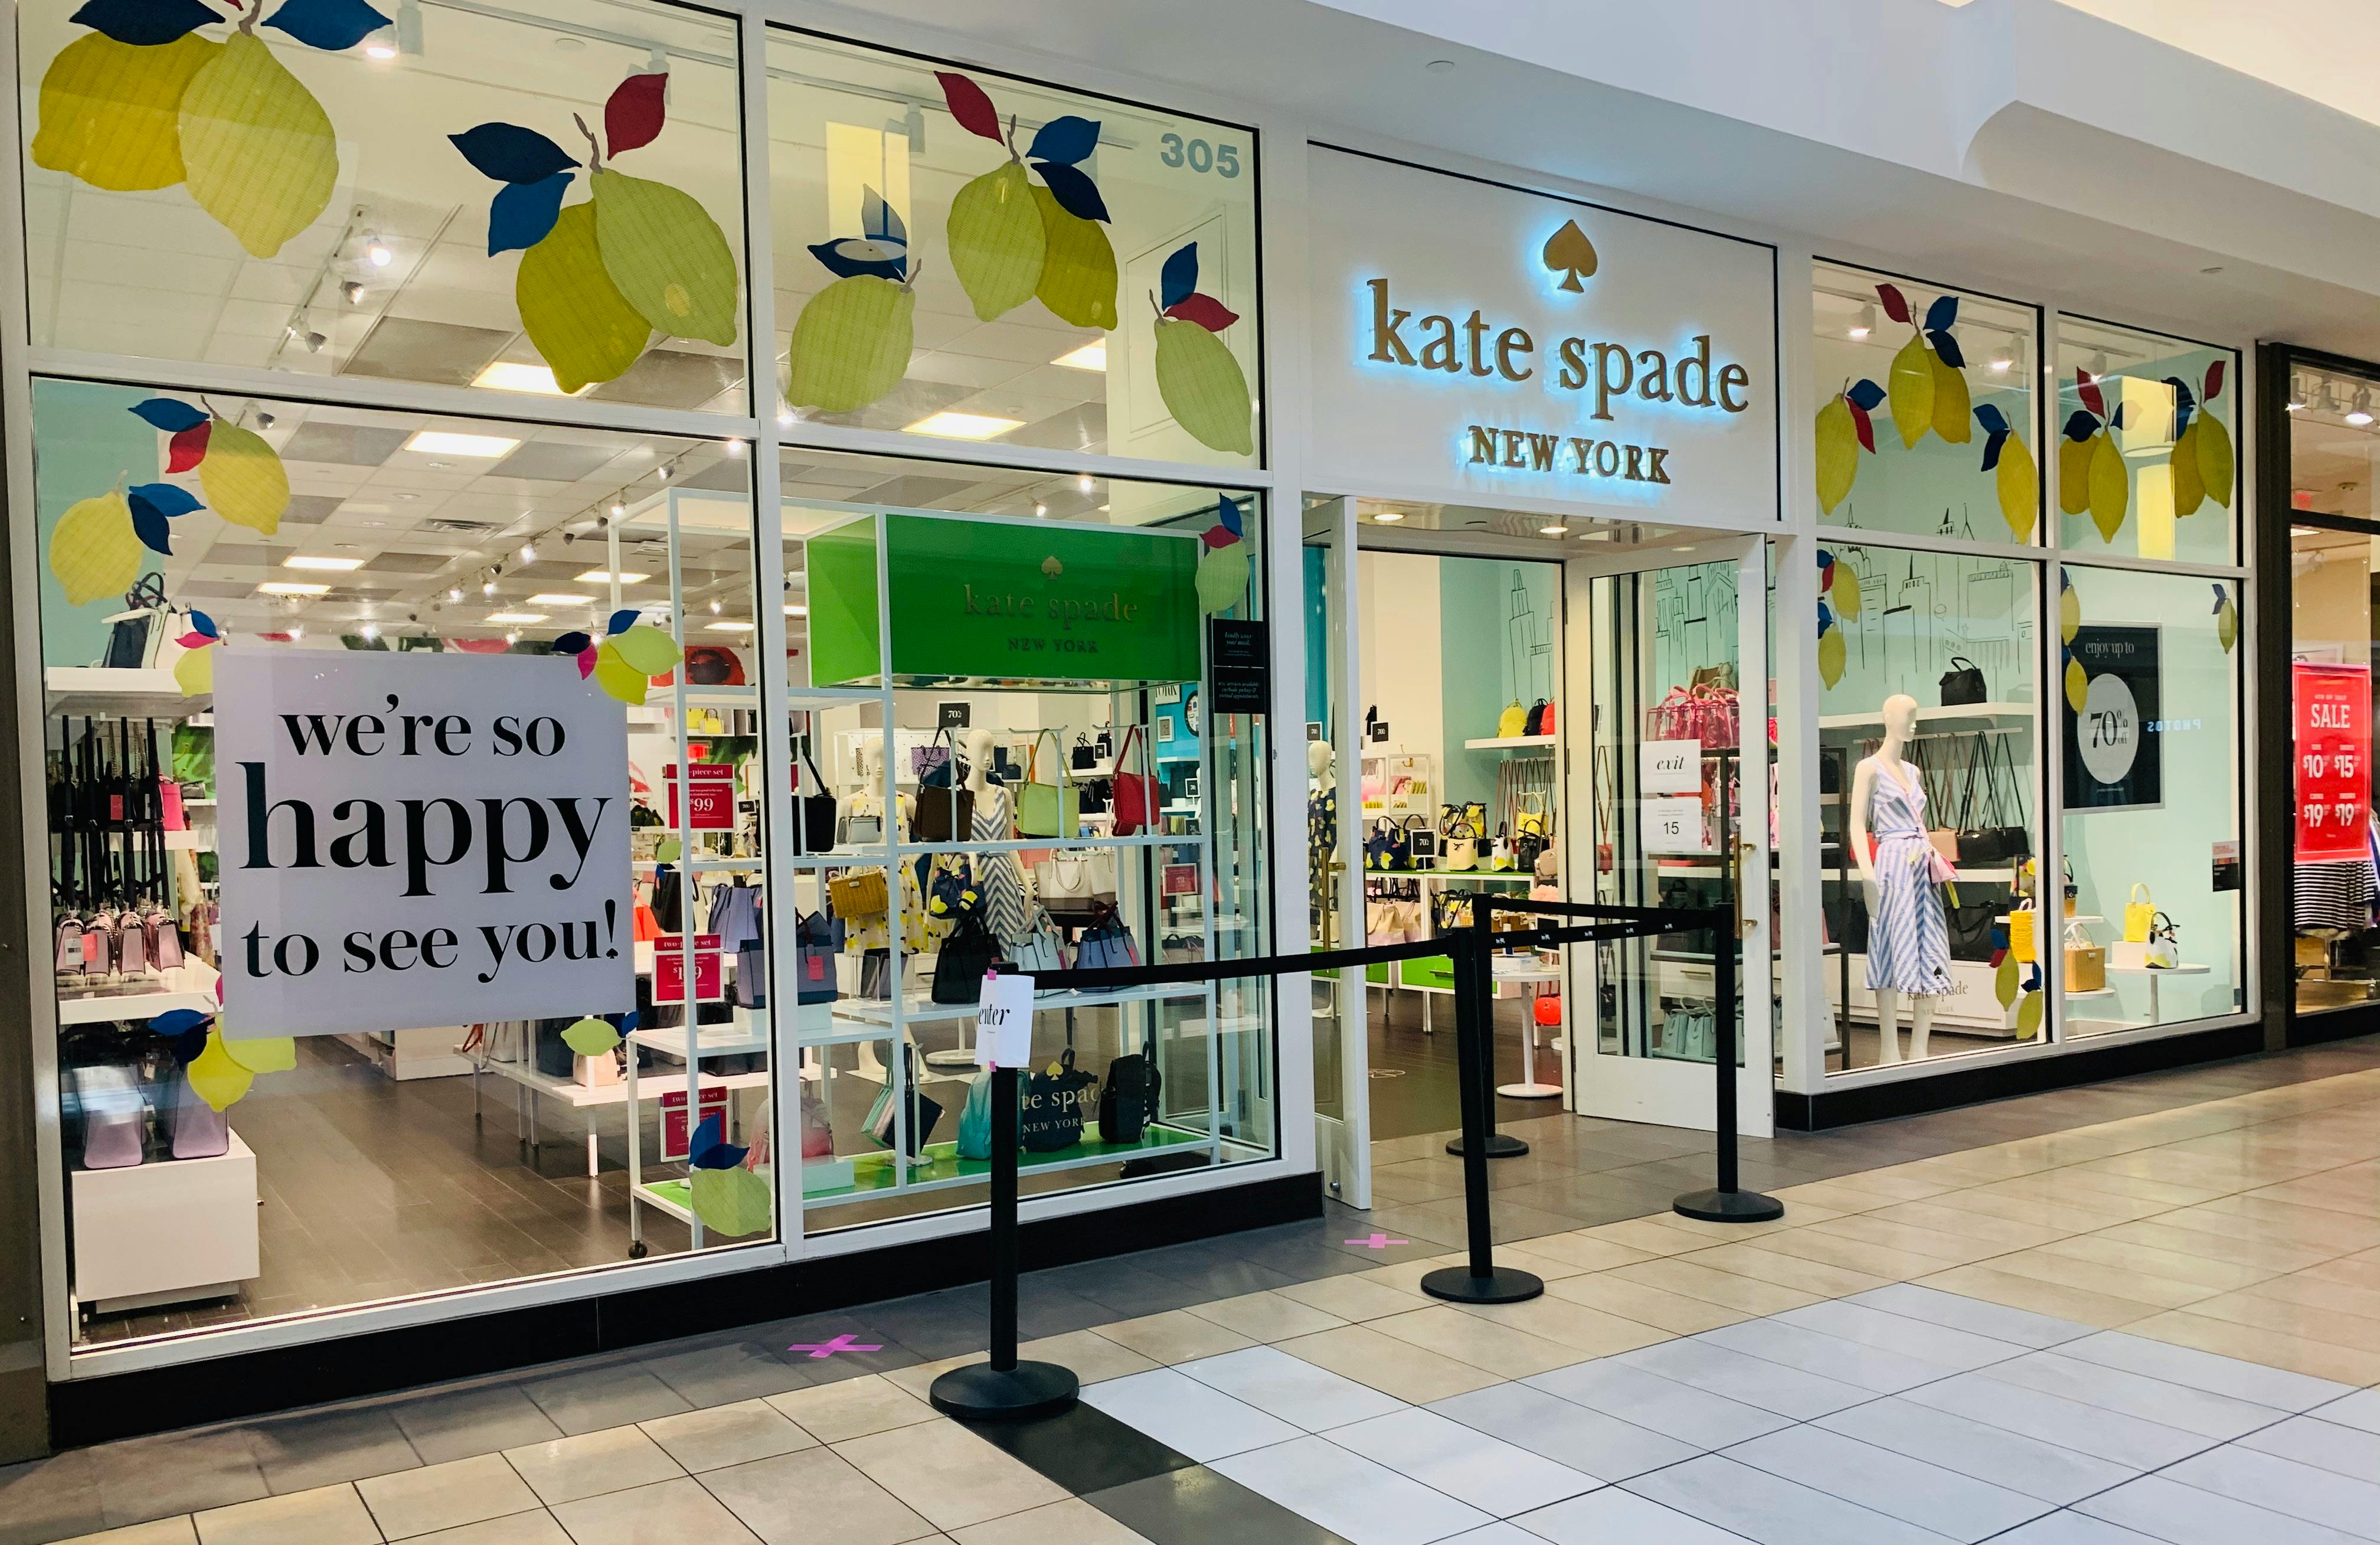 Kate Spade Outlet Vs Retail: What Are The Differences?